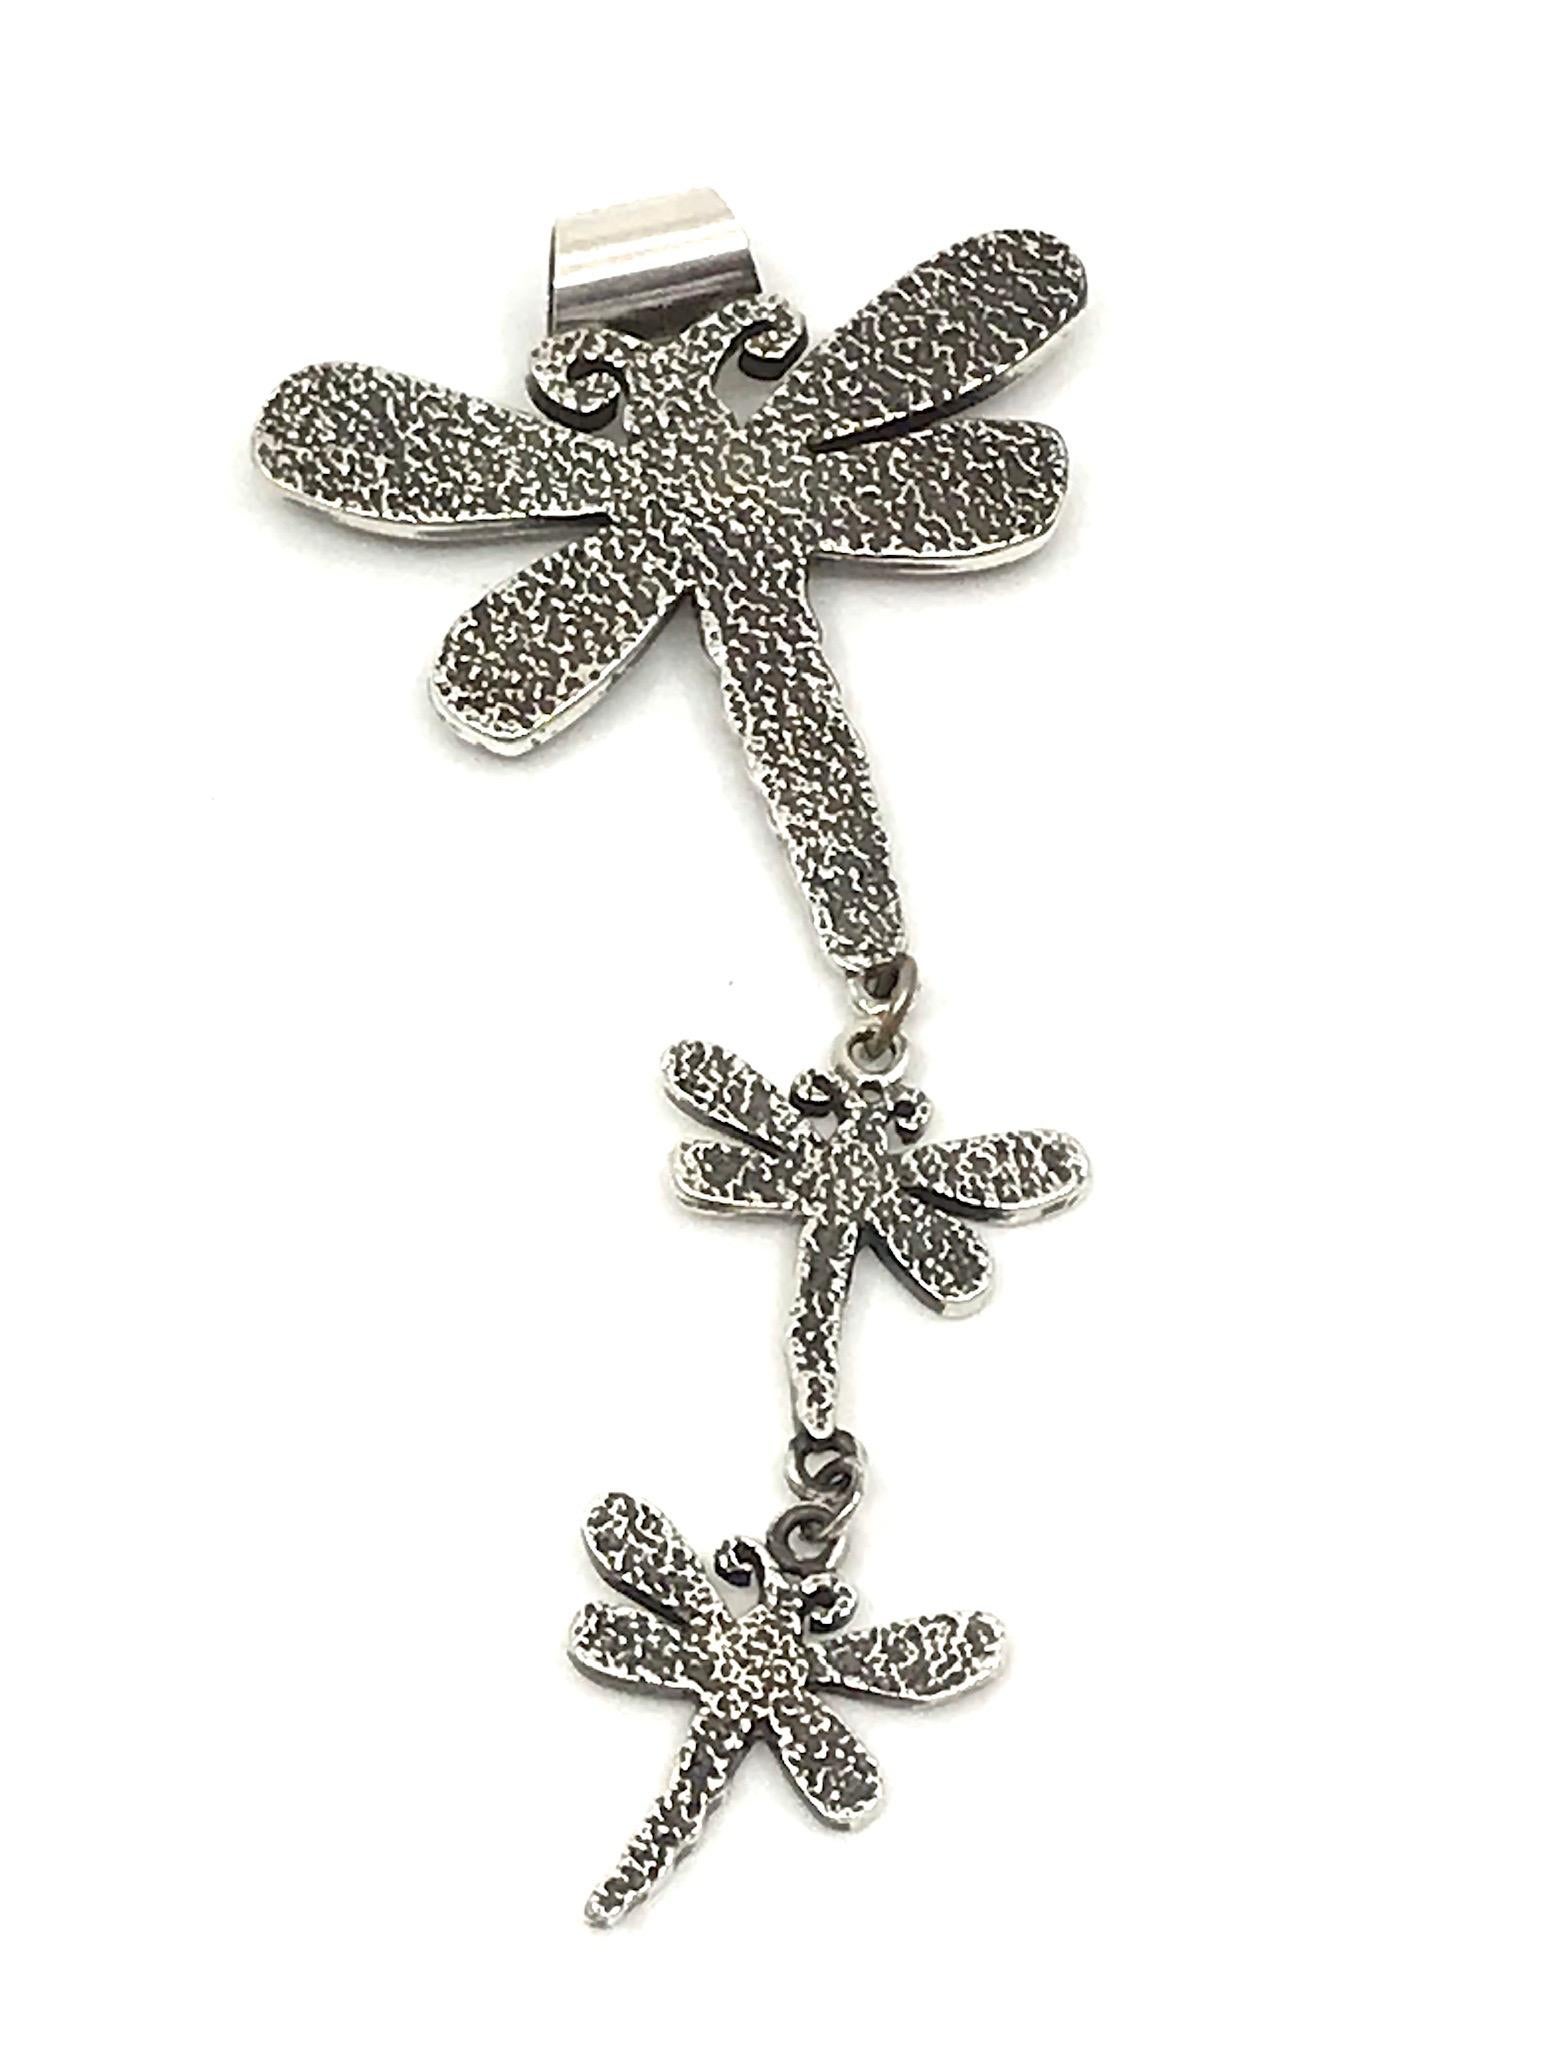 Dragonfly Drop Necklace, Melanie Yazzie cast silver drop pendant  Navajo designs

Dragonfly Drop Necklace, cast silver pendant Melanie Yazzie Navajo

Wearable art jewelry designs by internationally known printmaker, sculptor, and painter. 

Cast and